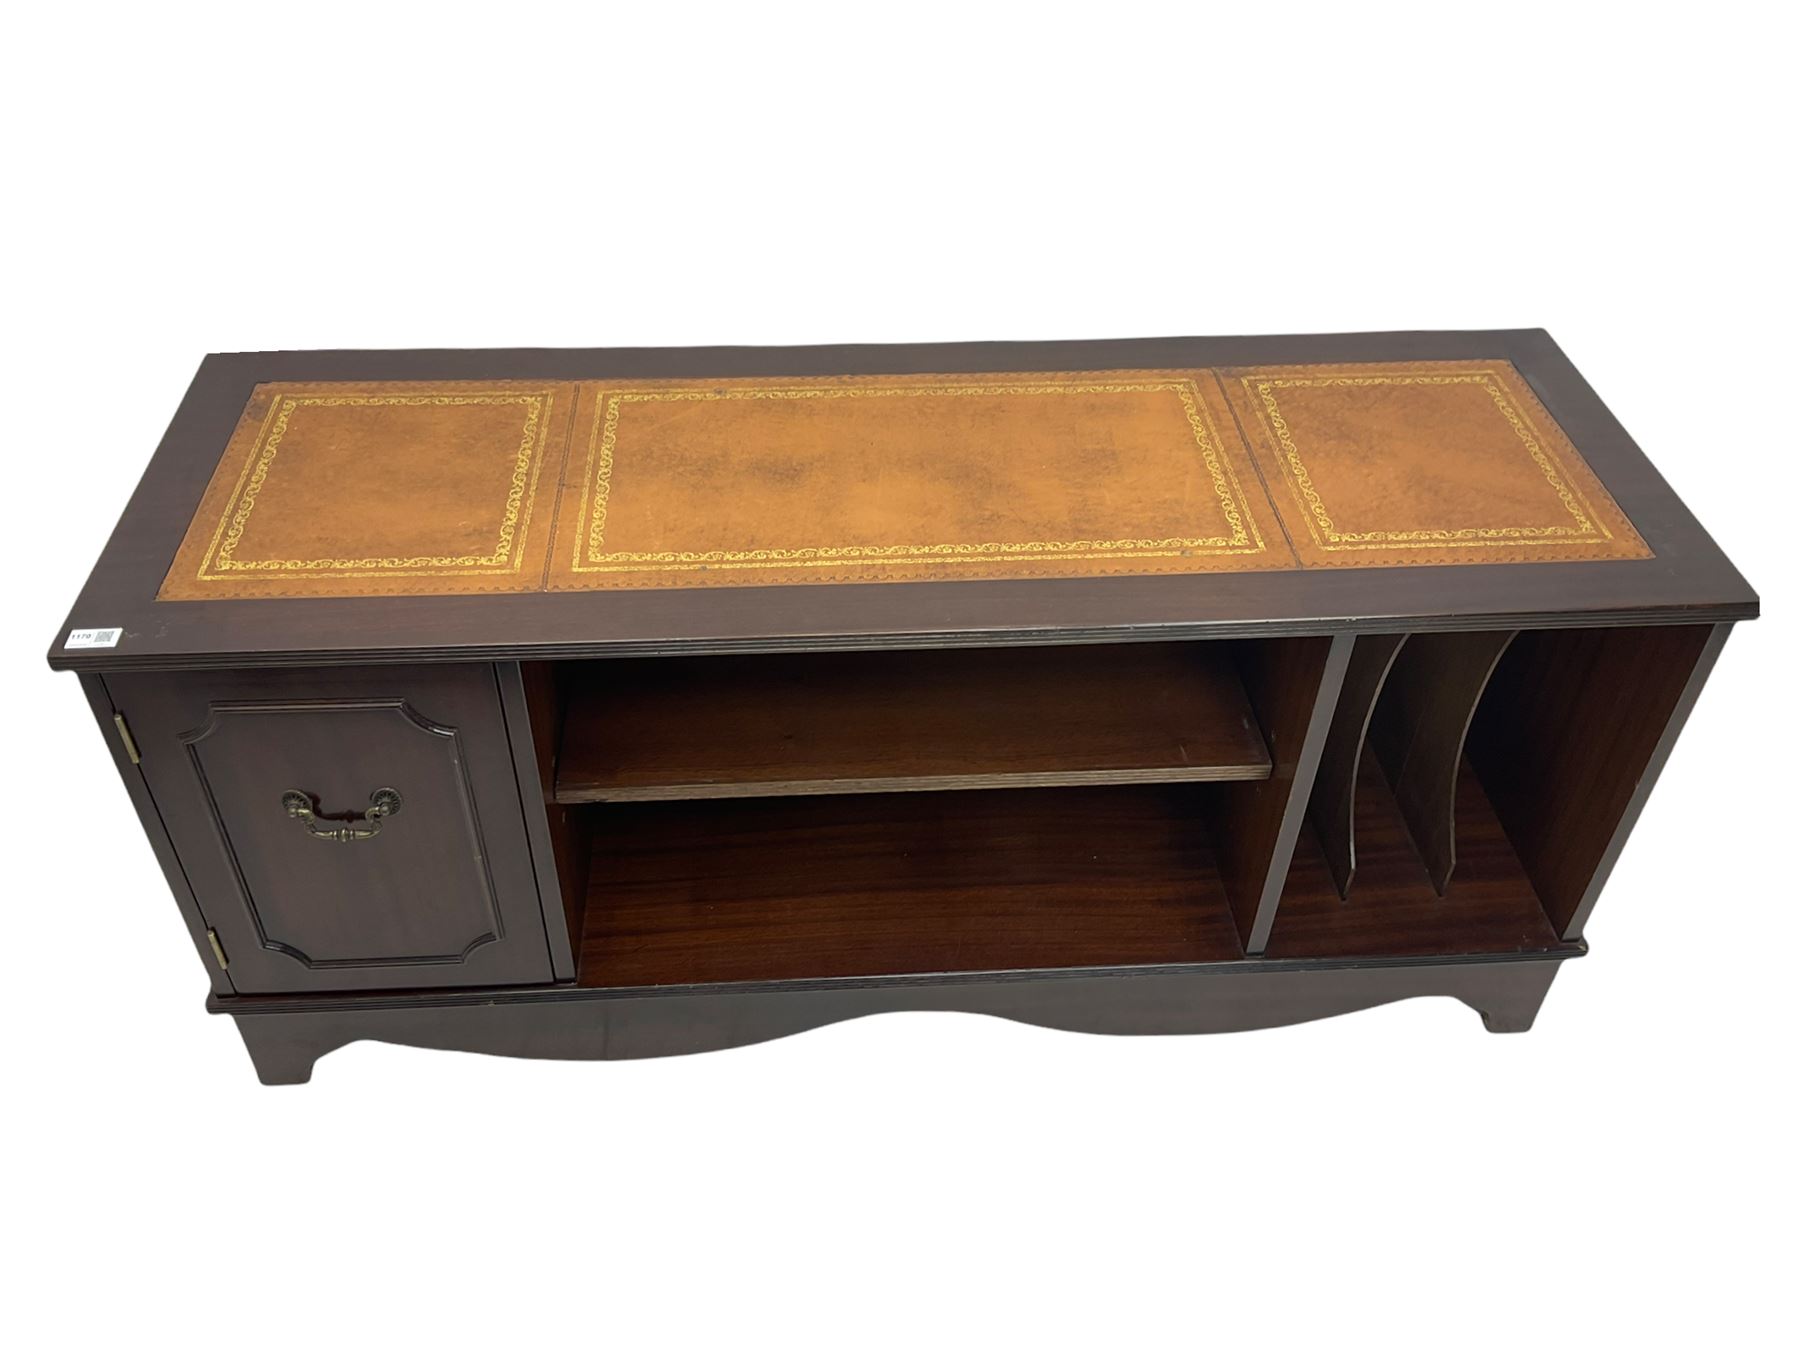 Reproduction mahogany stand with inset leather top - Image 2 of 5